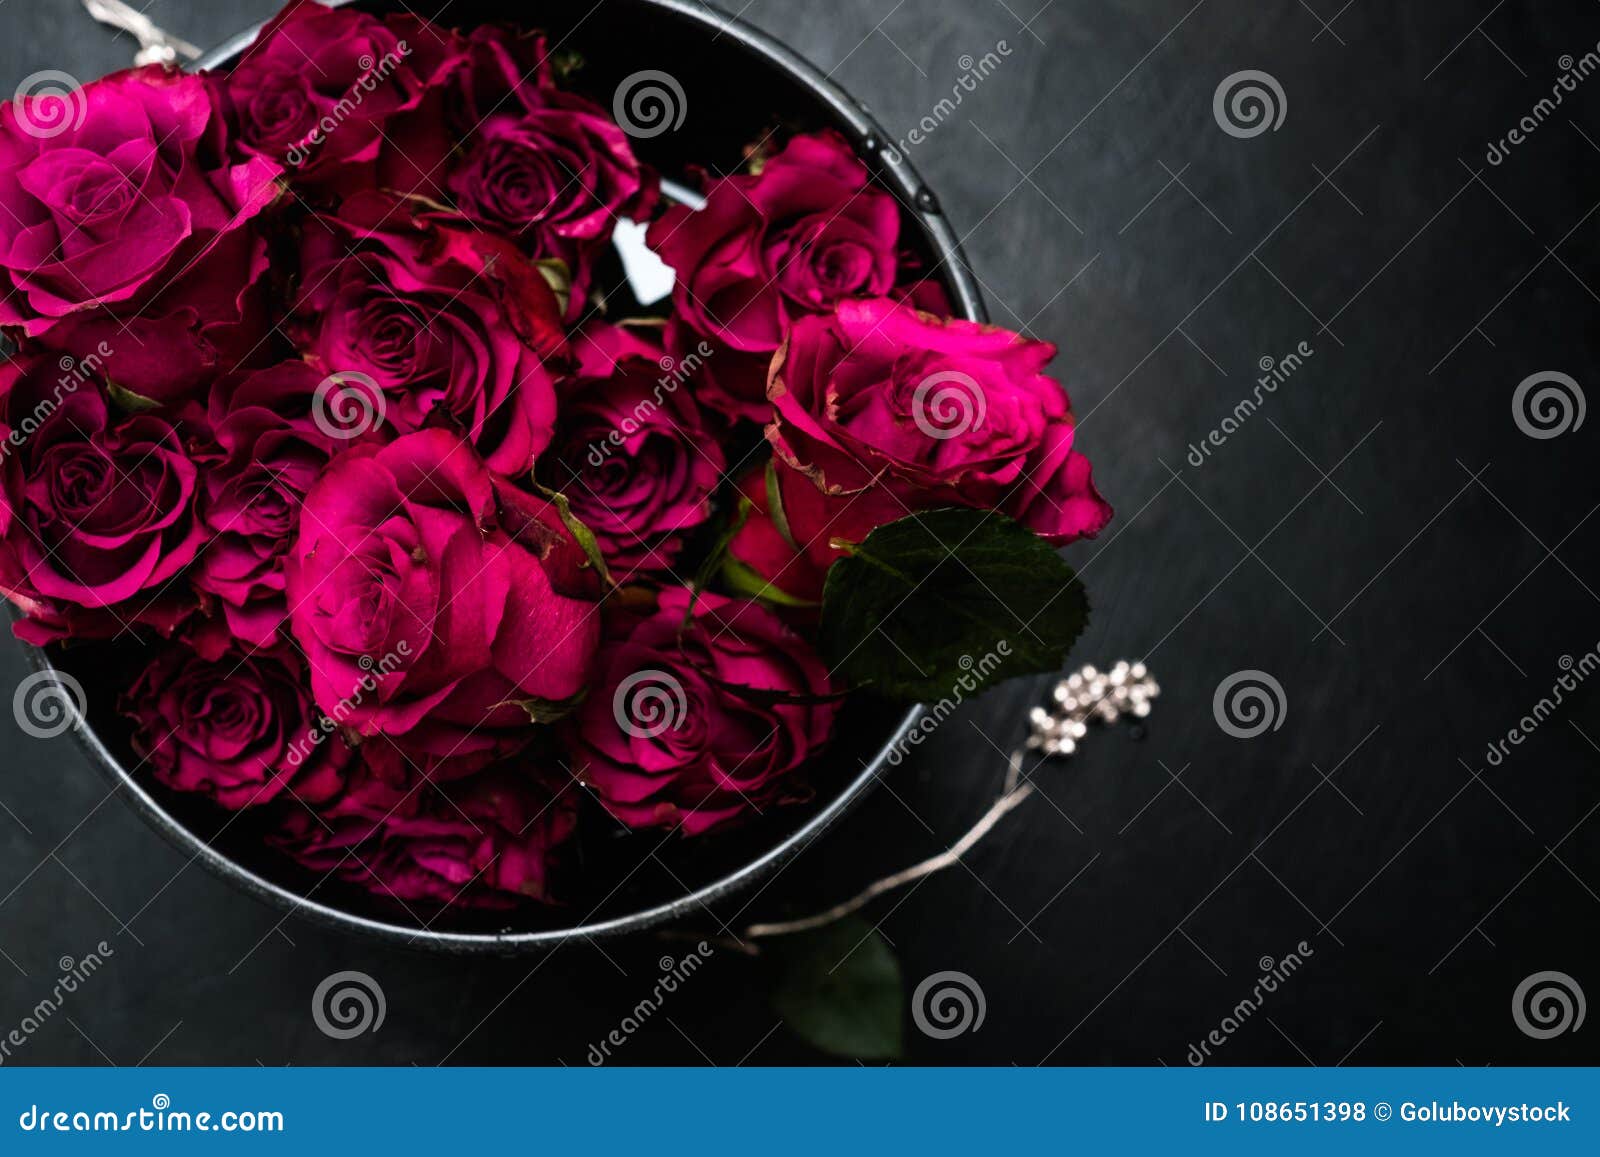 Love Romance Red Roses Bouquet Flowers Feelings Stock Photo ...